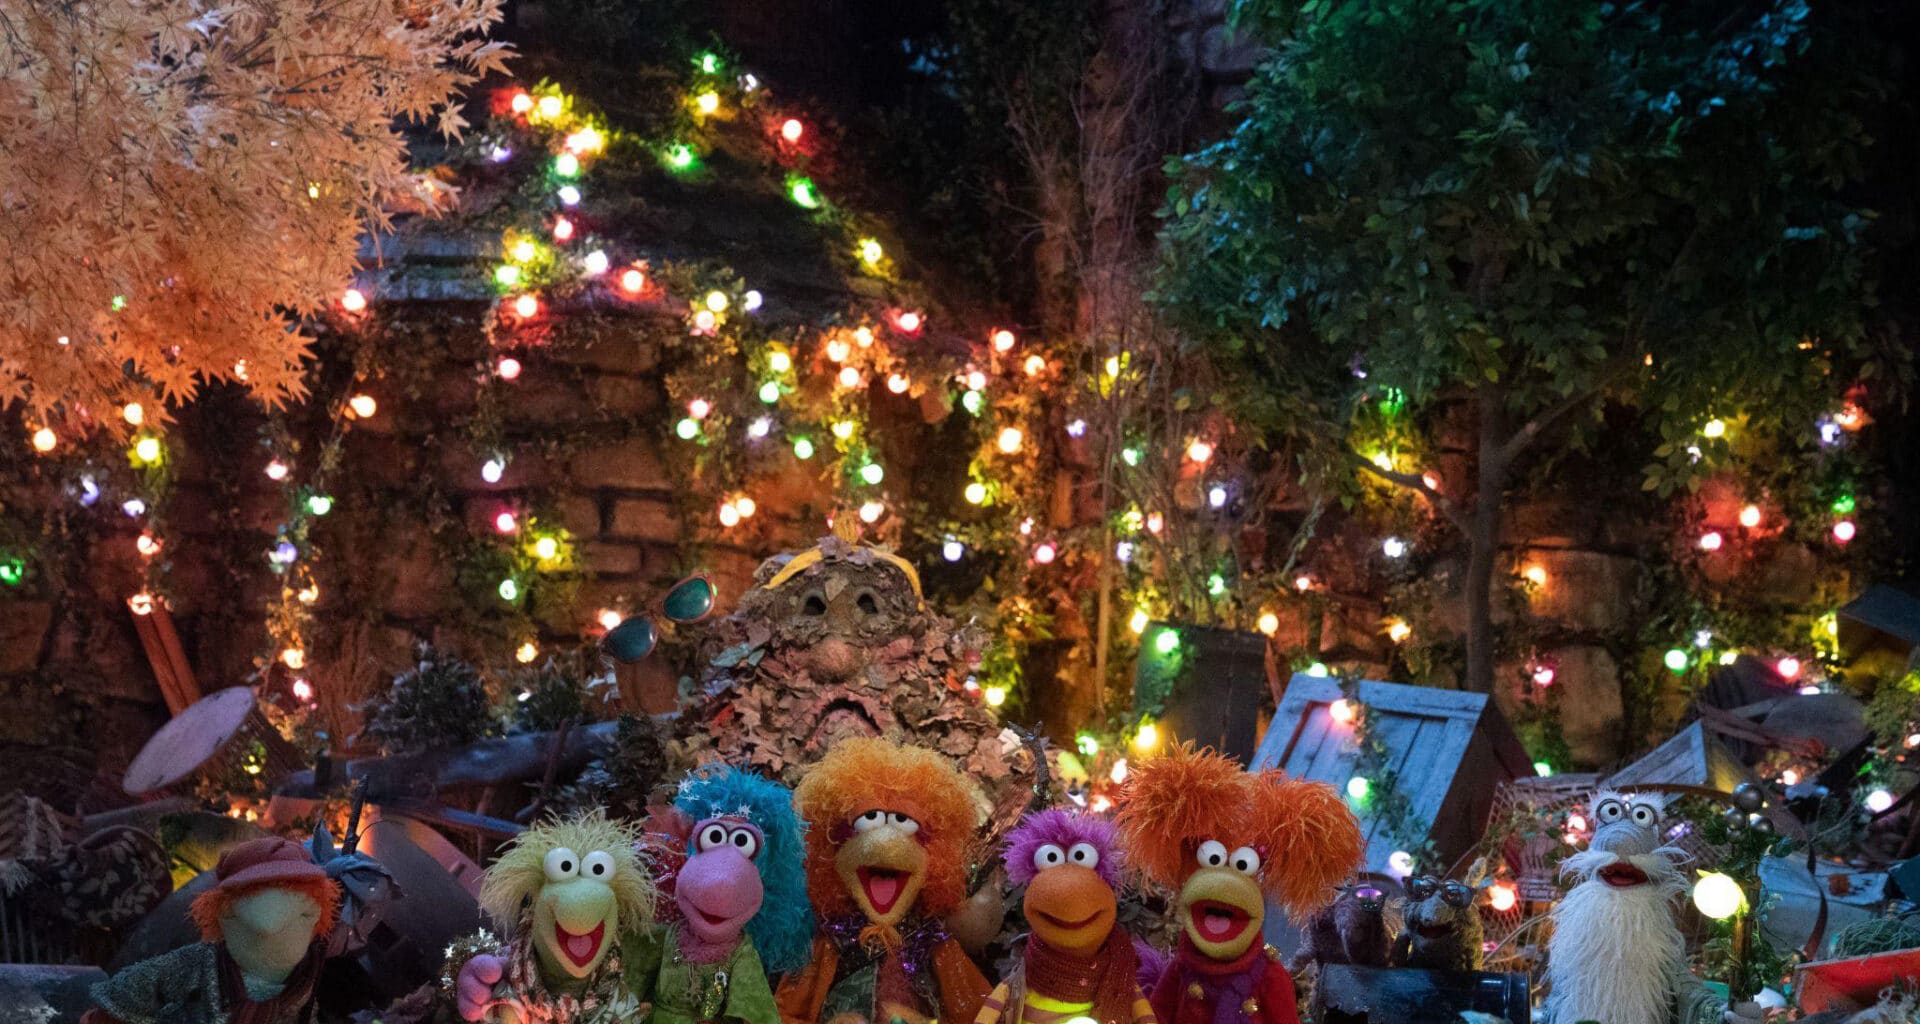 “Fraggle Rock: Back to the Rock” - Night of the Lights